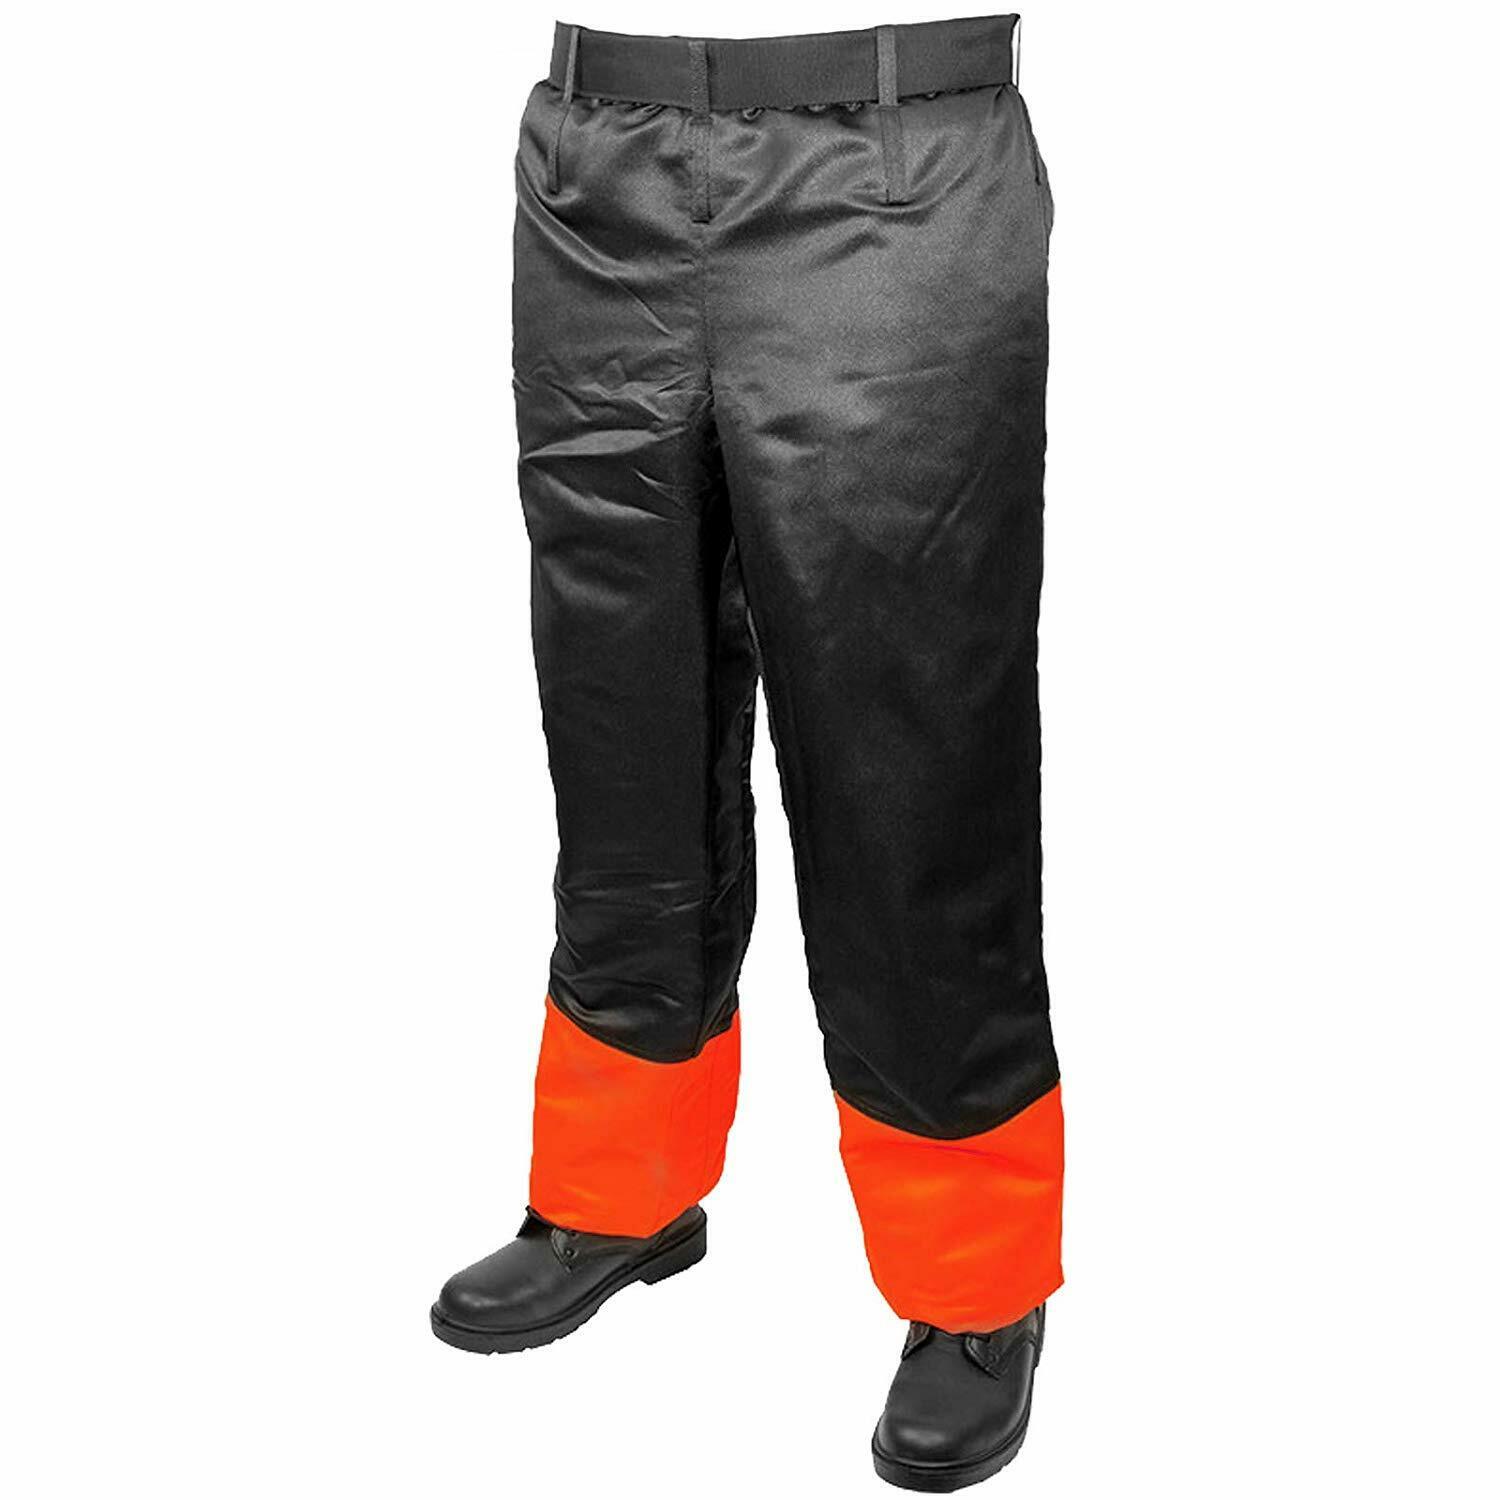 Chainsaw Trousers Chaps Adjustable 31-42" Forestry Safety Protective